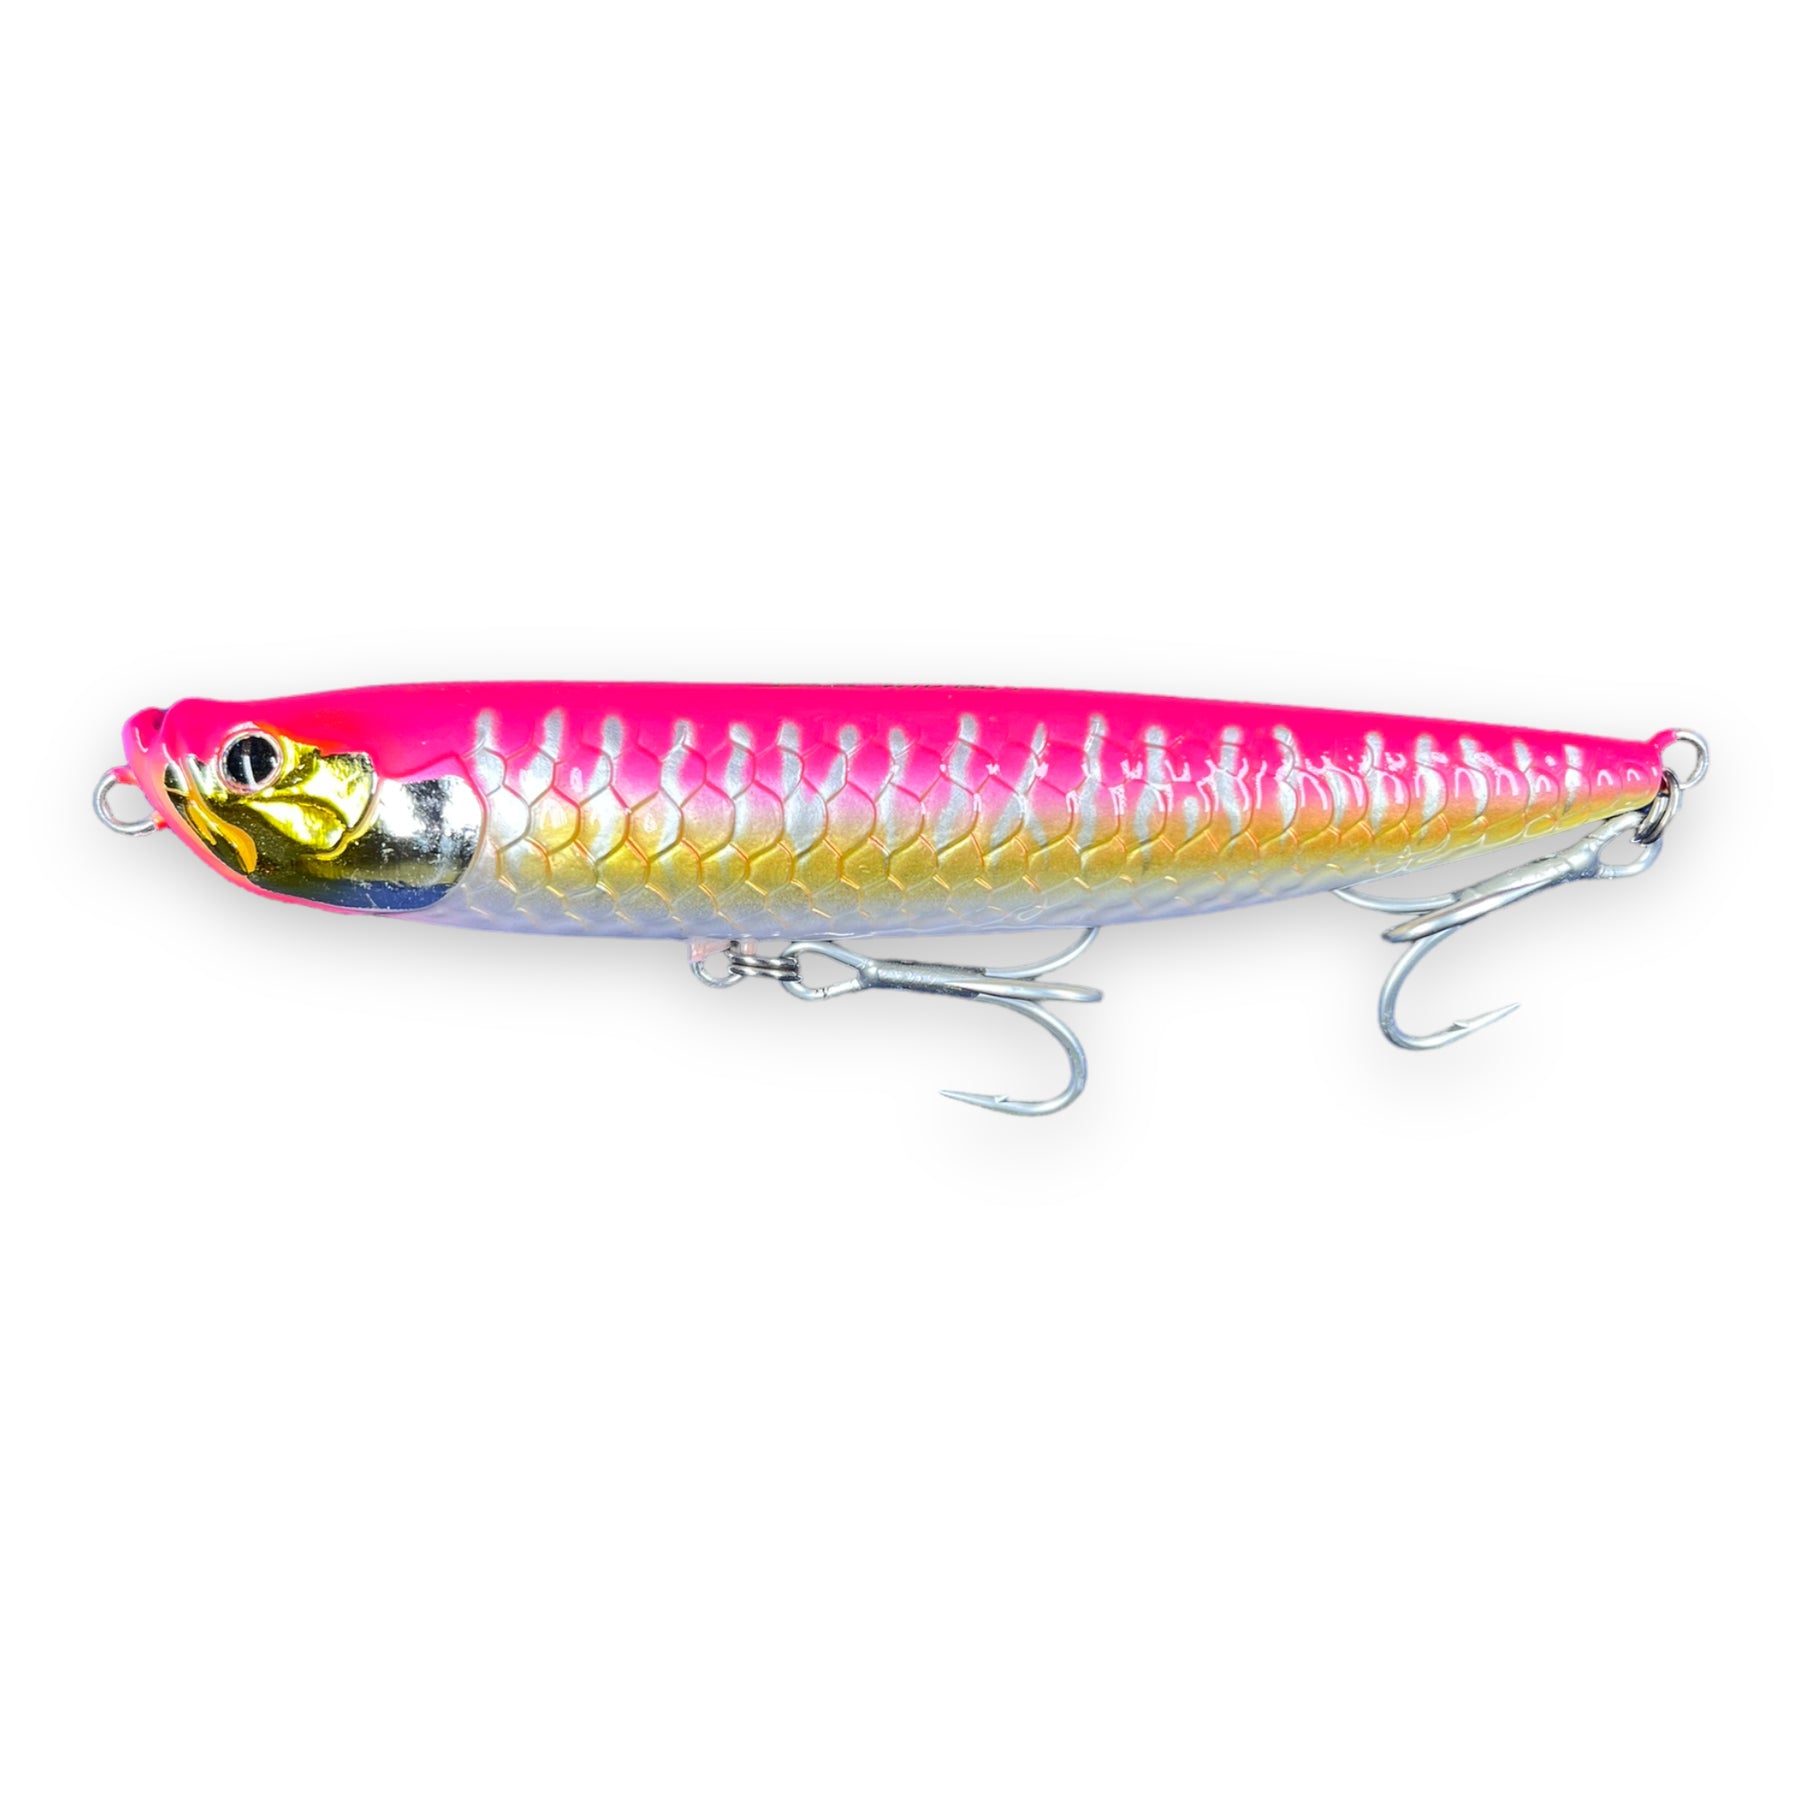 LJ's Compleat Angler Gladstone - Molix shad 140 and 185 in store now!  Running a flasher in the bottom that ca be changed out to run another  treble if needed these are